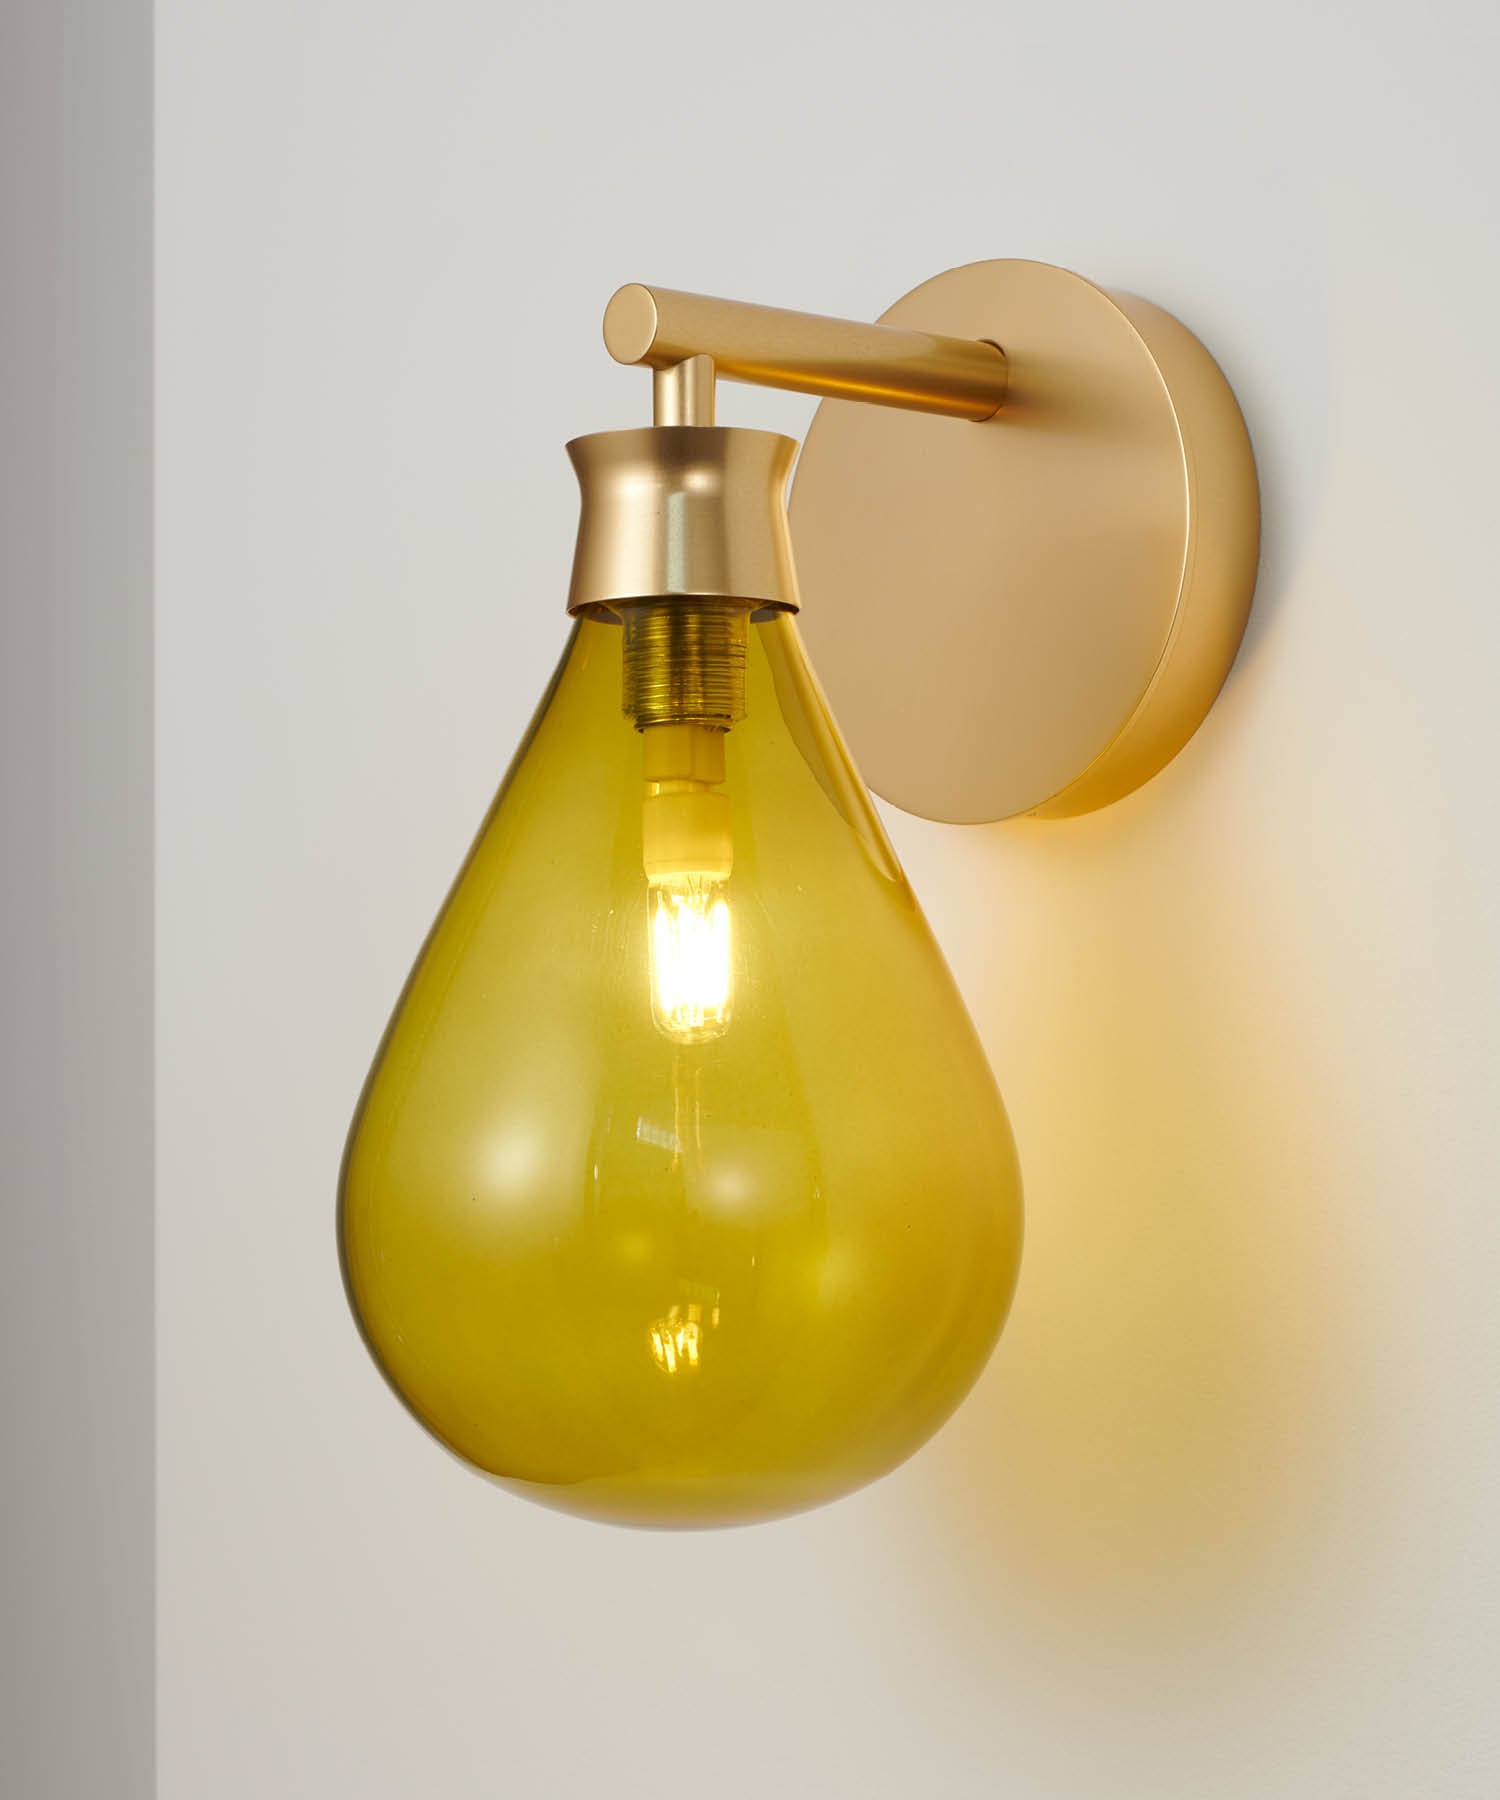 Contemporary and refined, the Cintola wall light combines hand-blown glass with a precision-machined aluminium body.
Available in a range of seven glass colours and three metal finishes, the wall light can also be mounted in two different